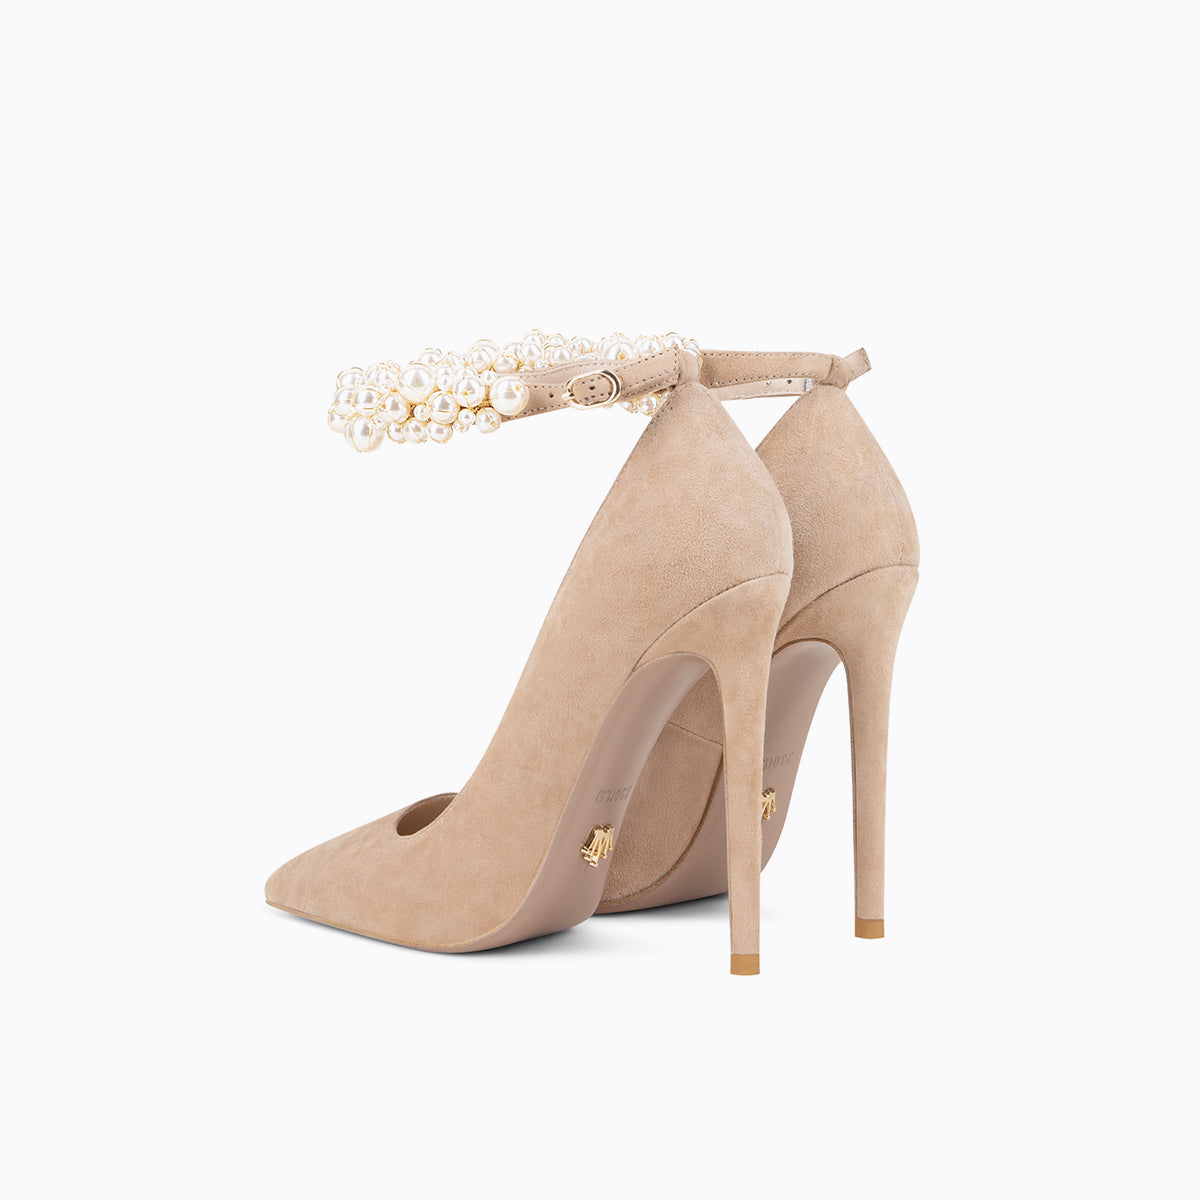 Fabeifei autumn and winter new suede sexy pearl  super high heels shoes- Cleo